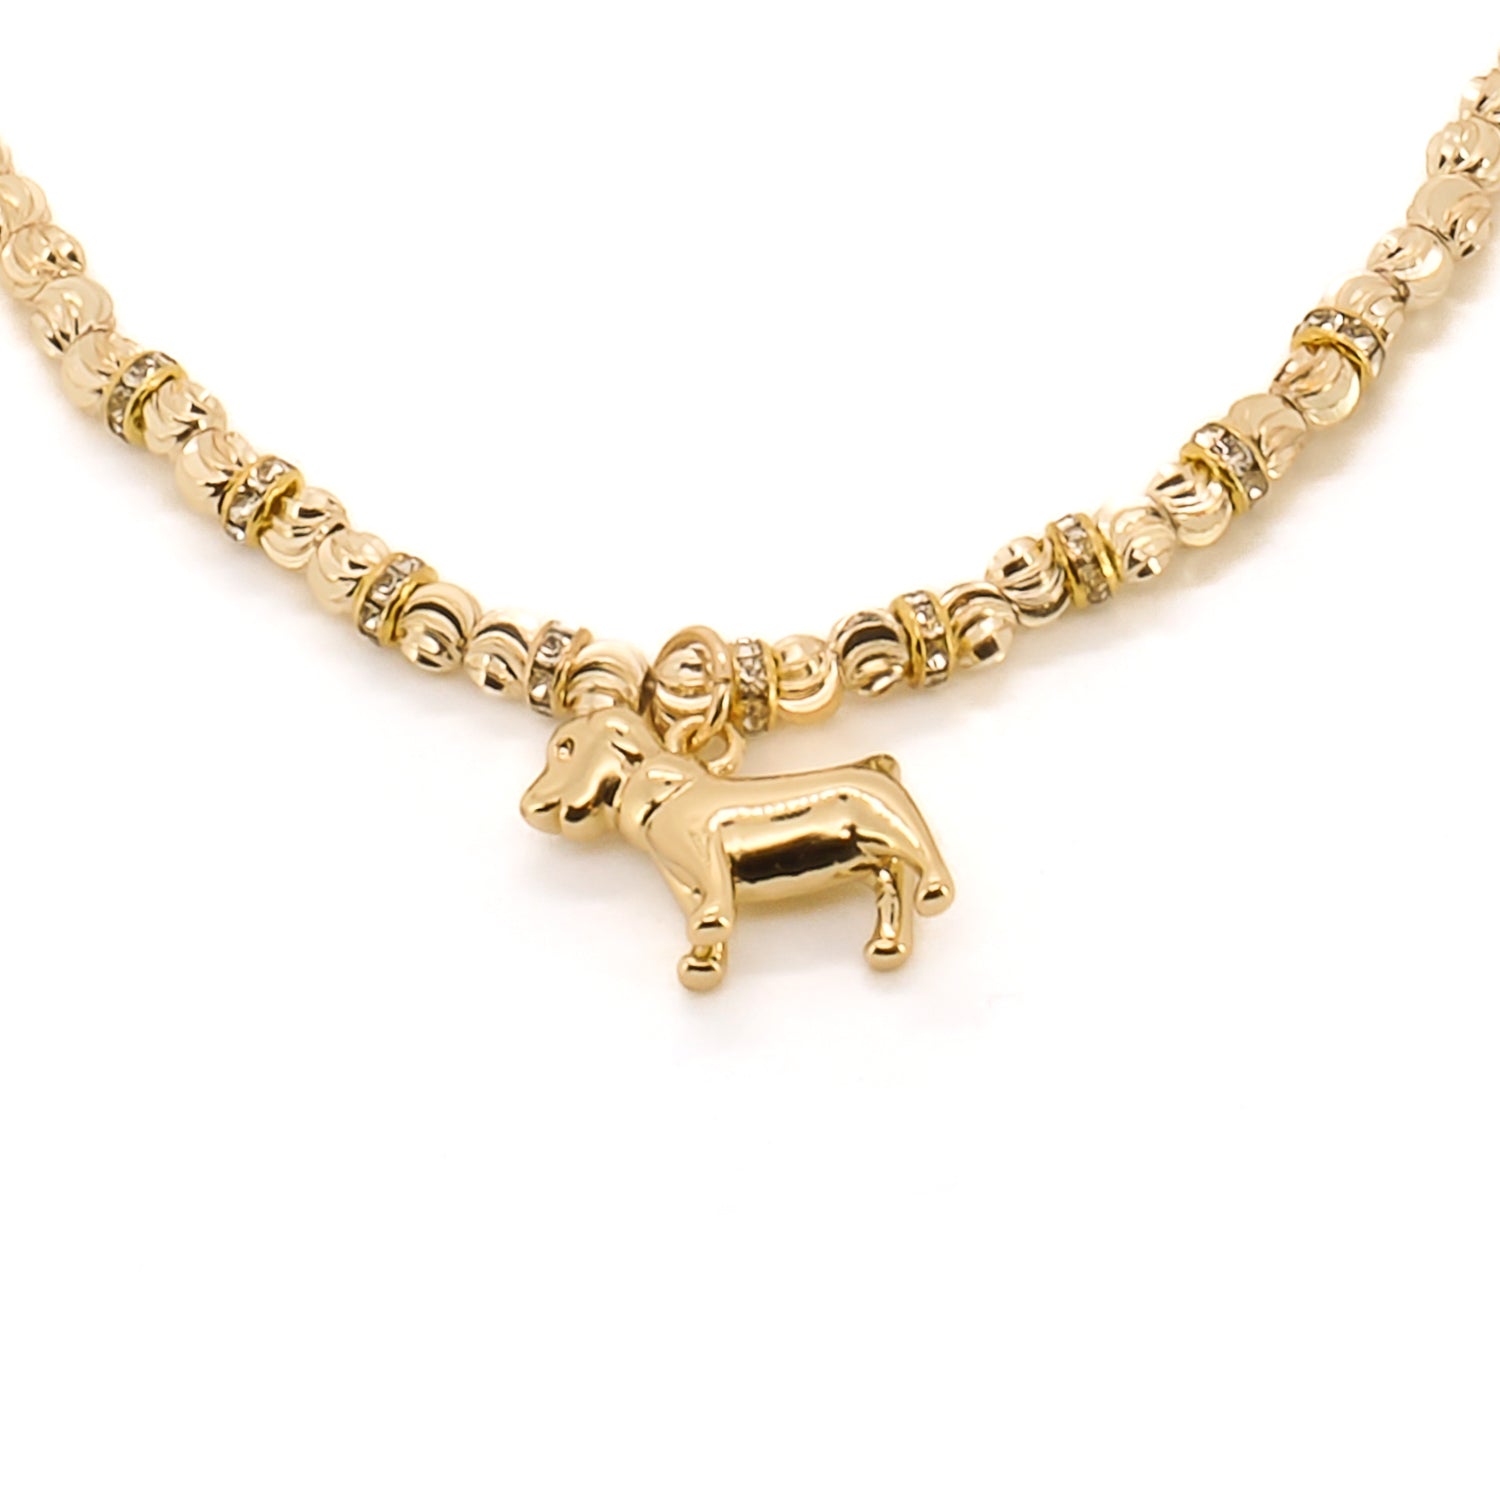 the Happy Dog Gold Necklace, highlighting the delicate chain and the positioning of the charming dog pendant, creating a stylish and eye-catching accessory.